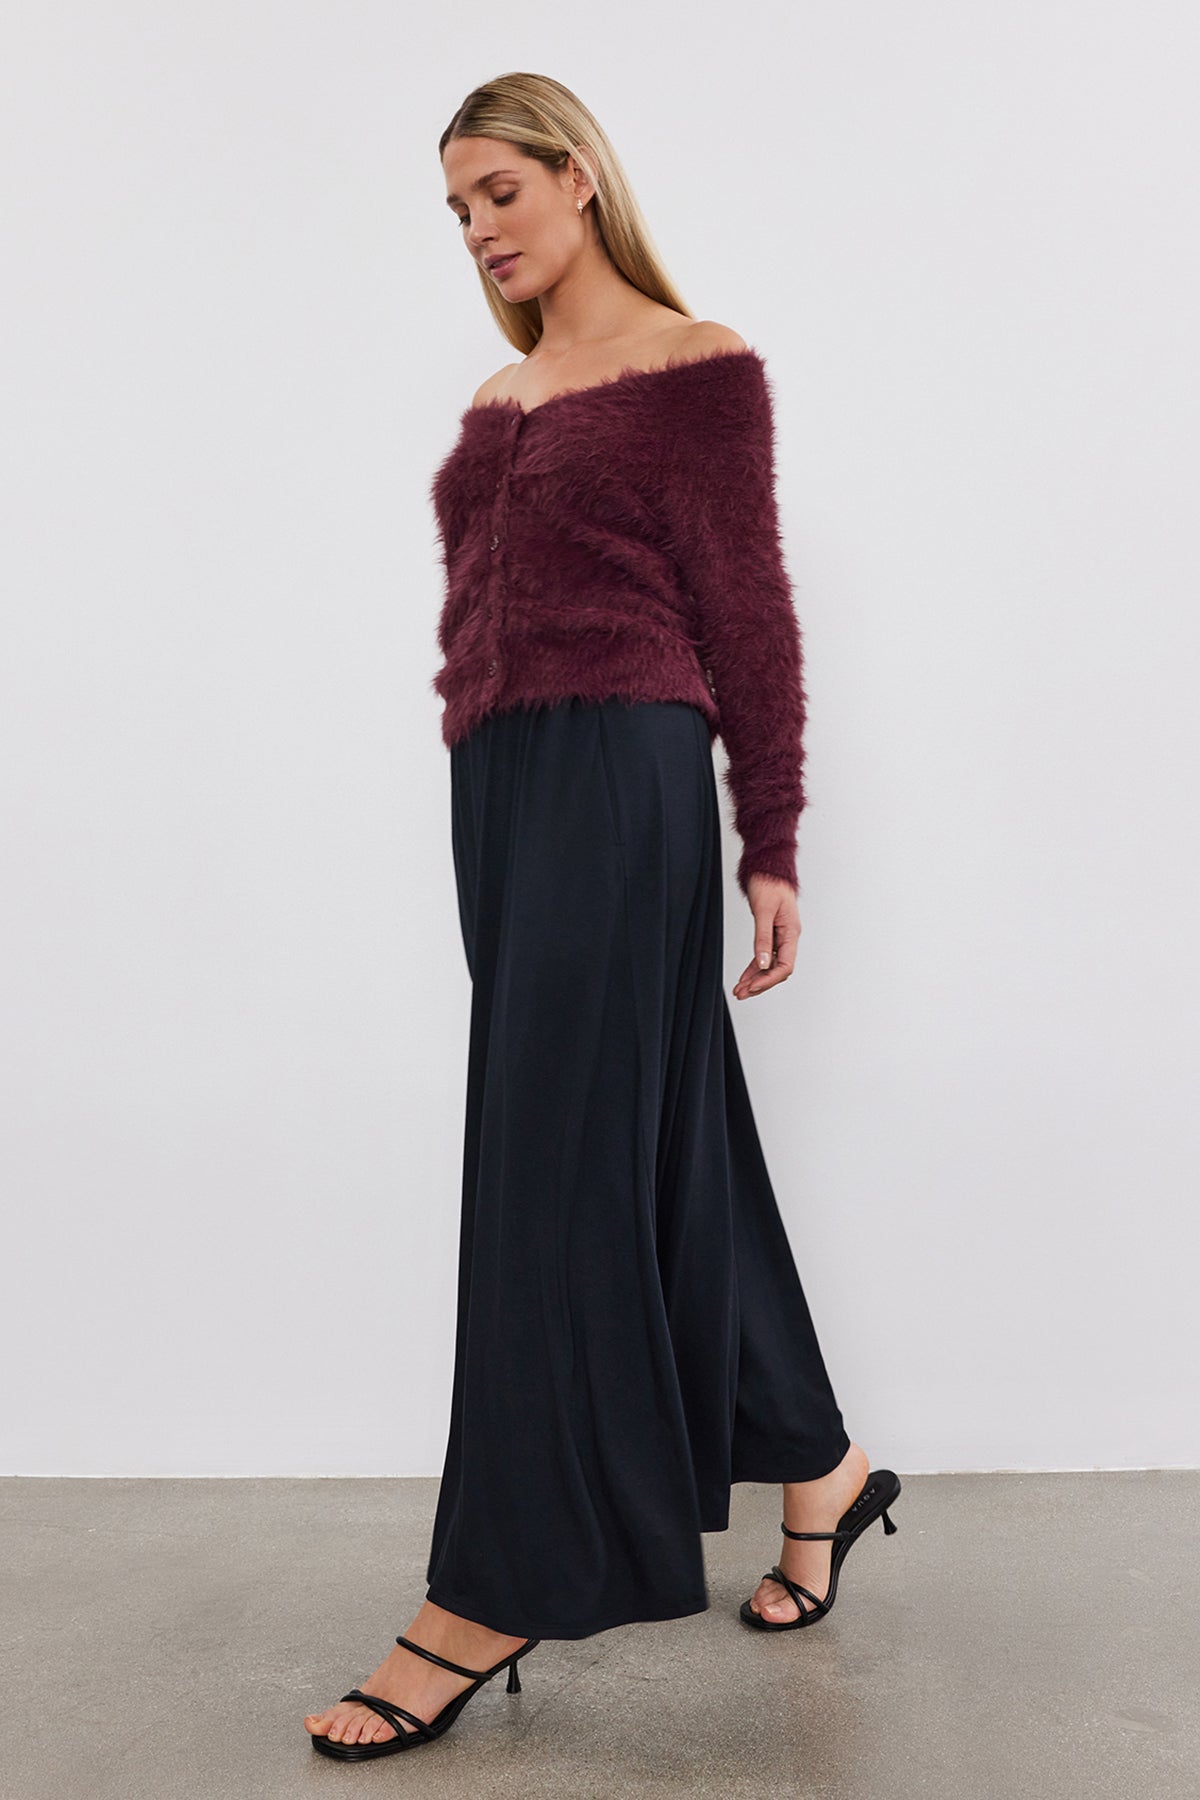 The model is wearing a burgundy MALAYA MAXI SKIRT by Velvet by Graham & Spencer and black wide leg pants made from soft jersey knit fabric.-35660953452737